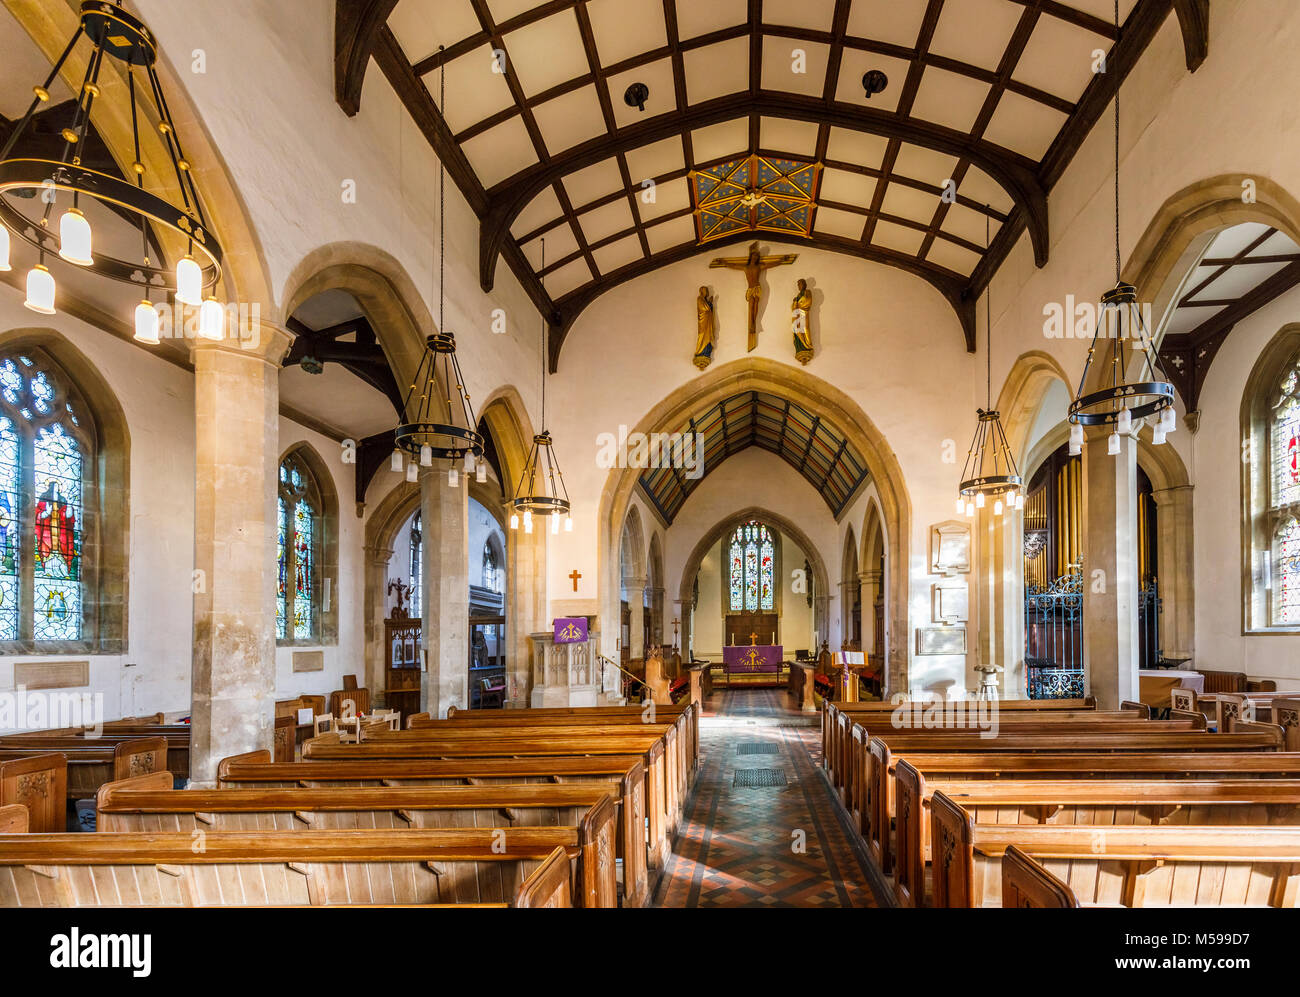 Interior of St Mary's parish church with traditional wooden pews and vaulted roof, Painswick, an unspoilt village in Gloucestershire Cotswolds Stock Photo